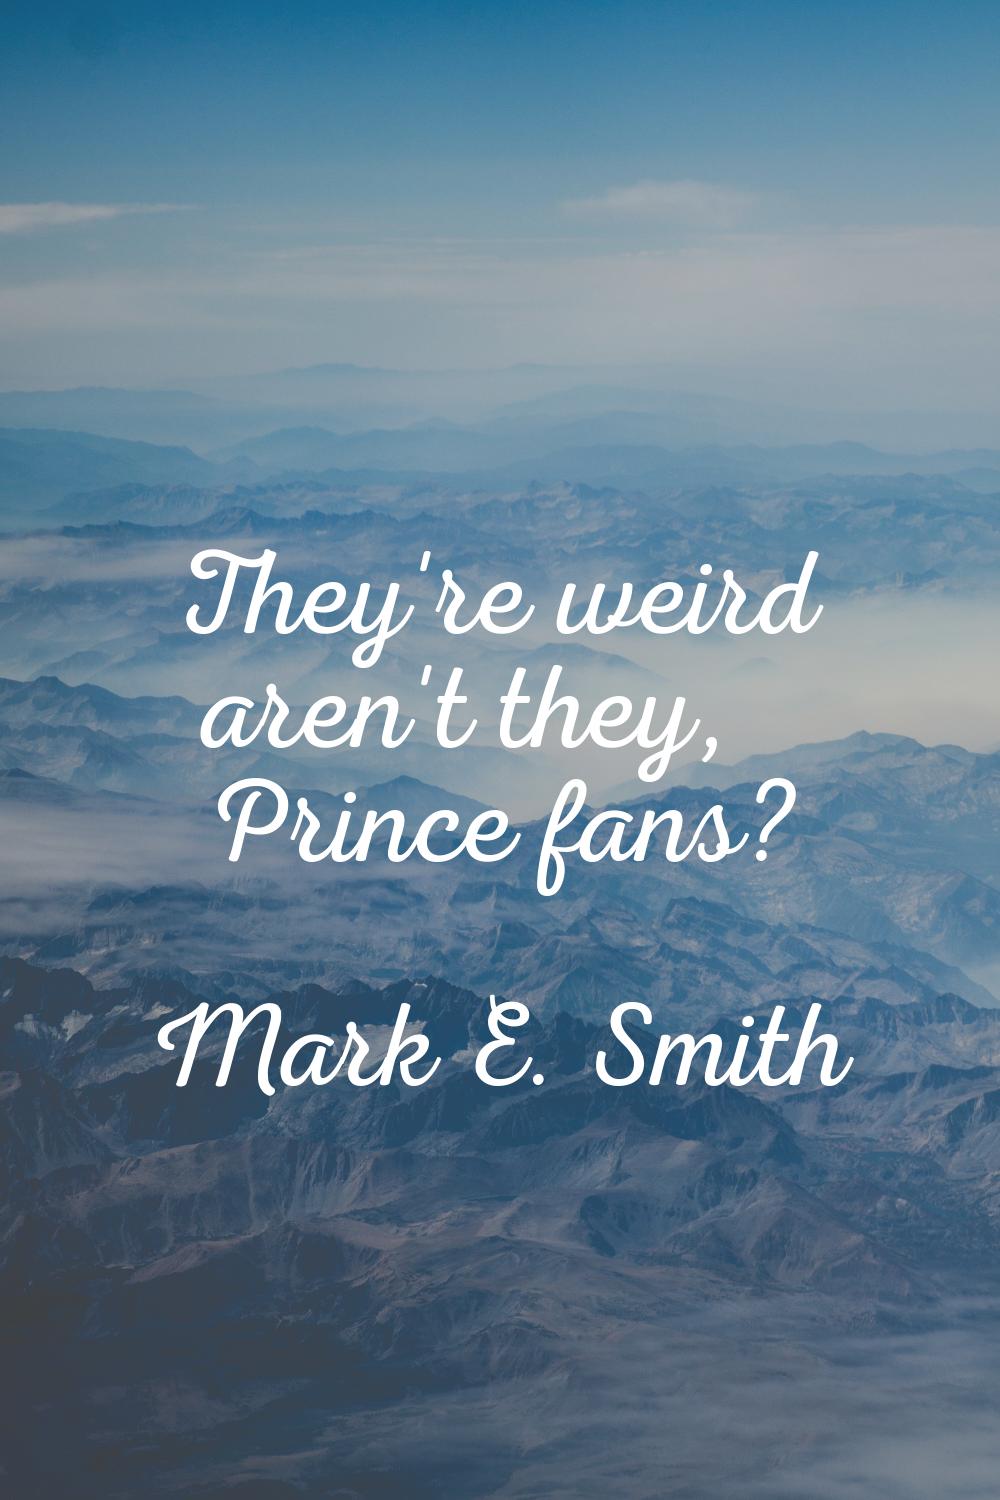 They're weird aren't they, Prince fans?